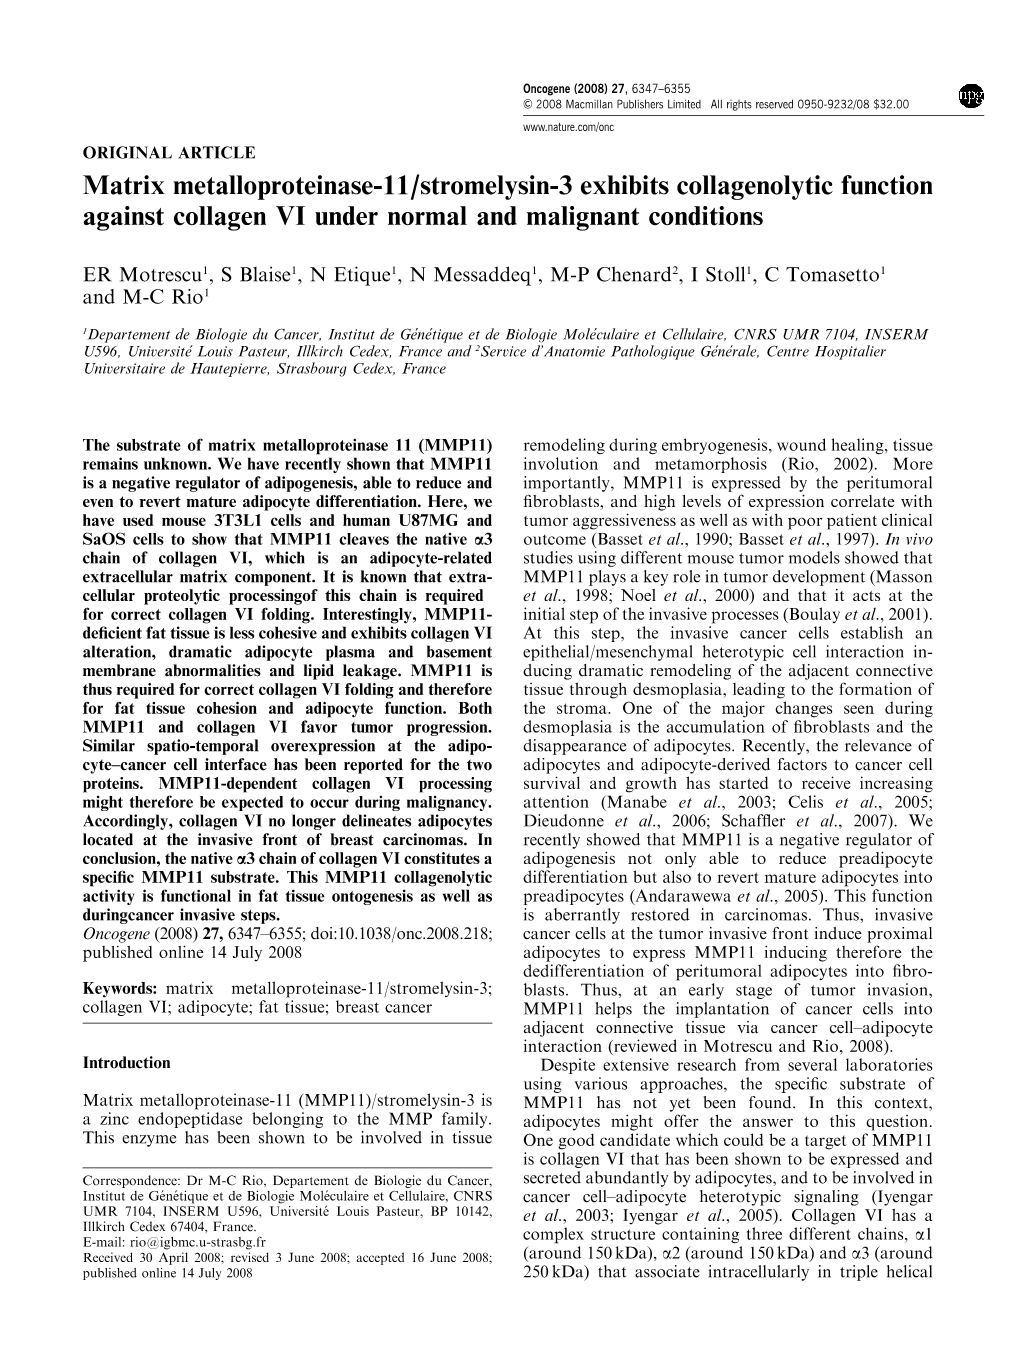 Matrix Metalloproteinase-11/Stromelysin-3 Exhibits Collagenolytic Function Against Collagen VI Under Normal and Malignant Conditions